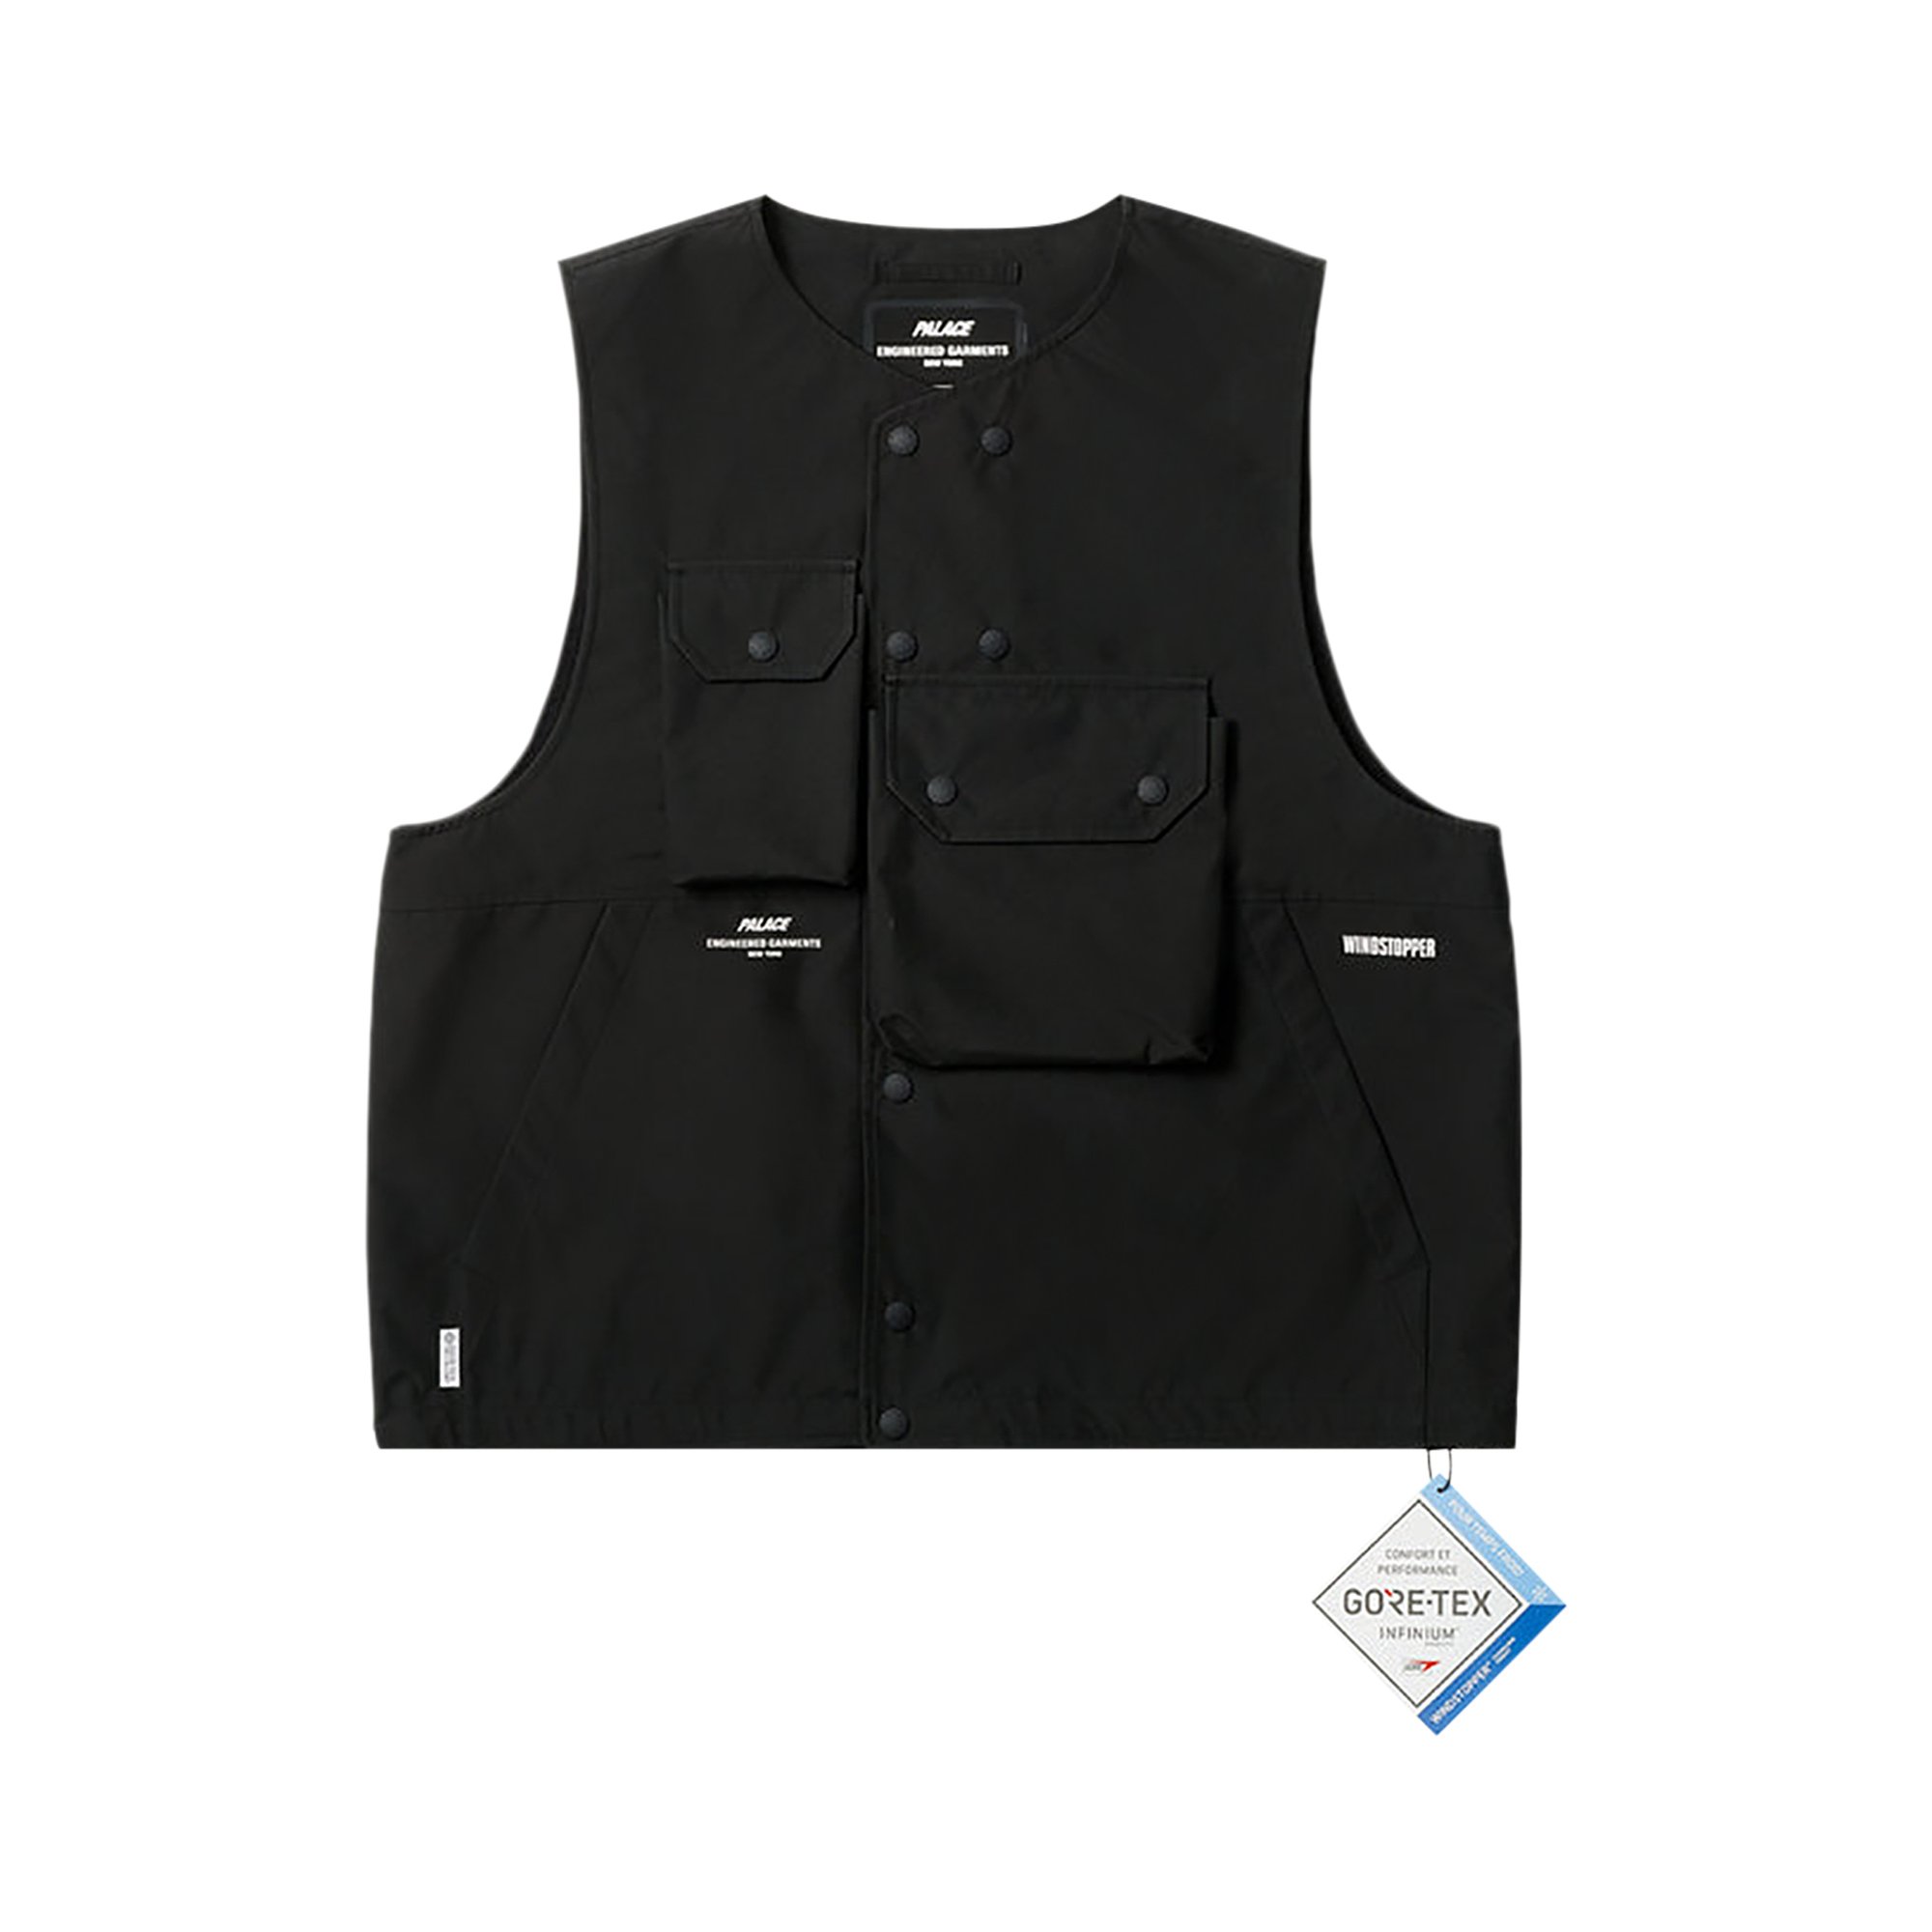 Buy Palace x Engineered Garments GORE TEX Infinium Cover Vest